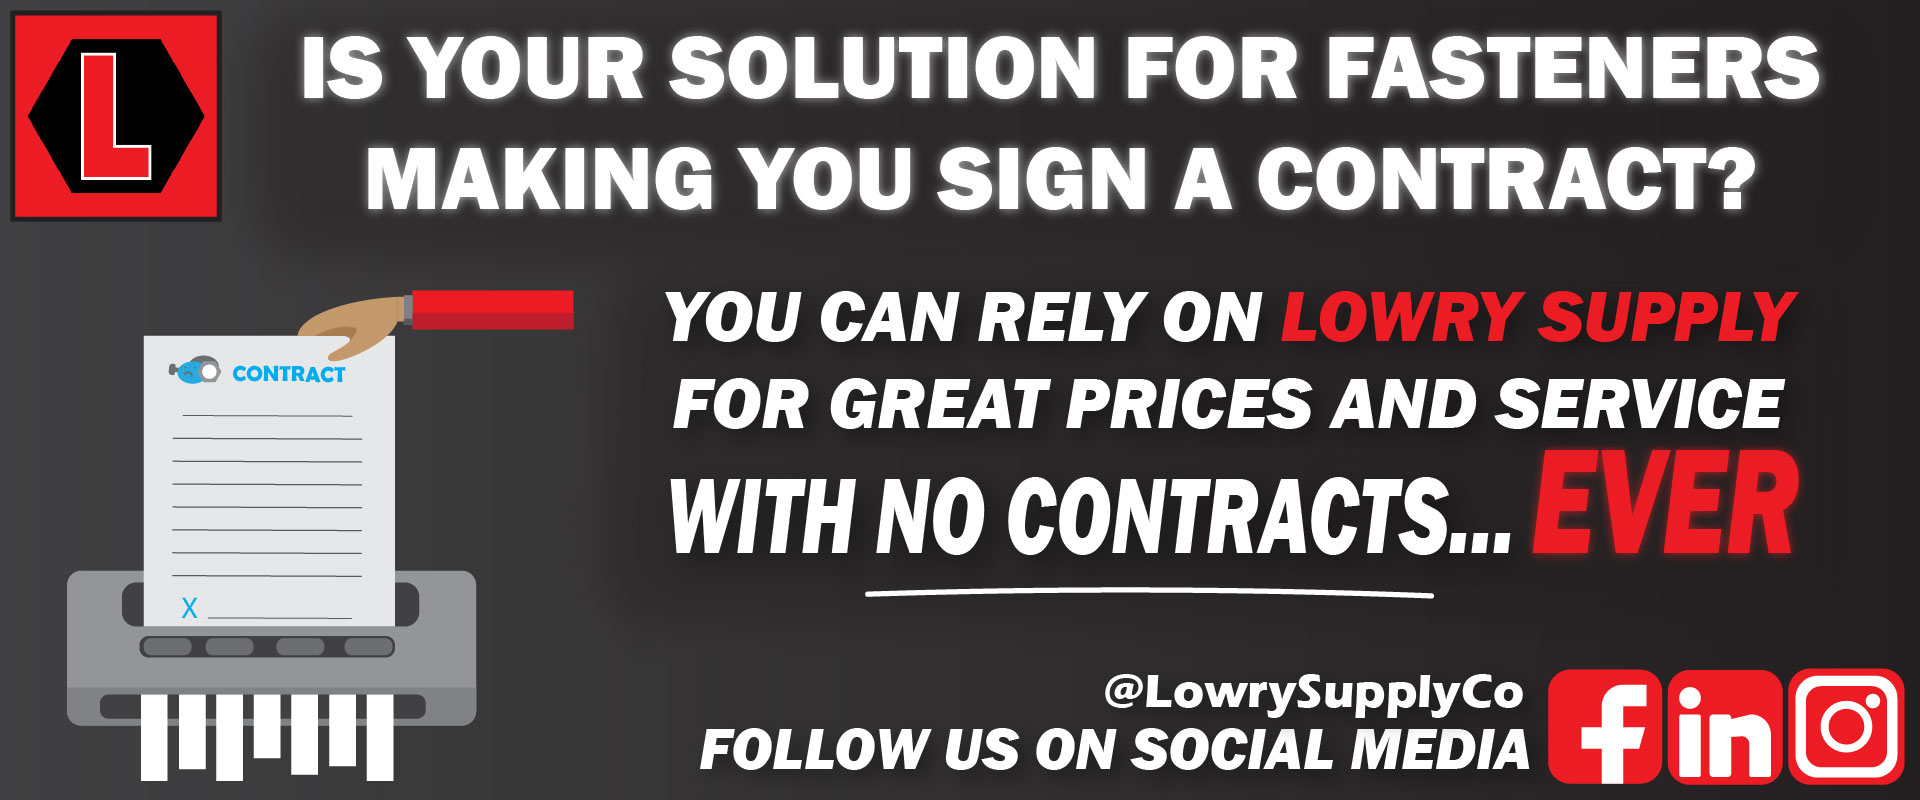 No Contracts Great Products and Service